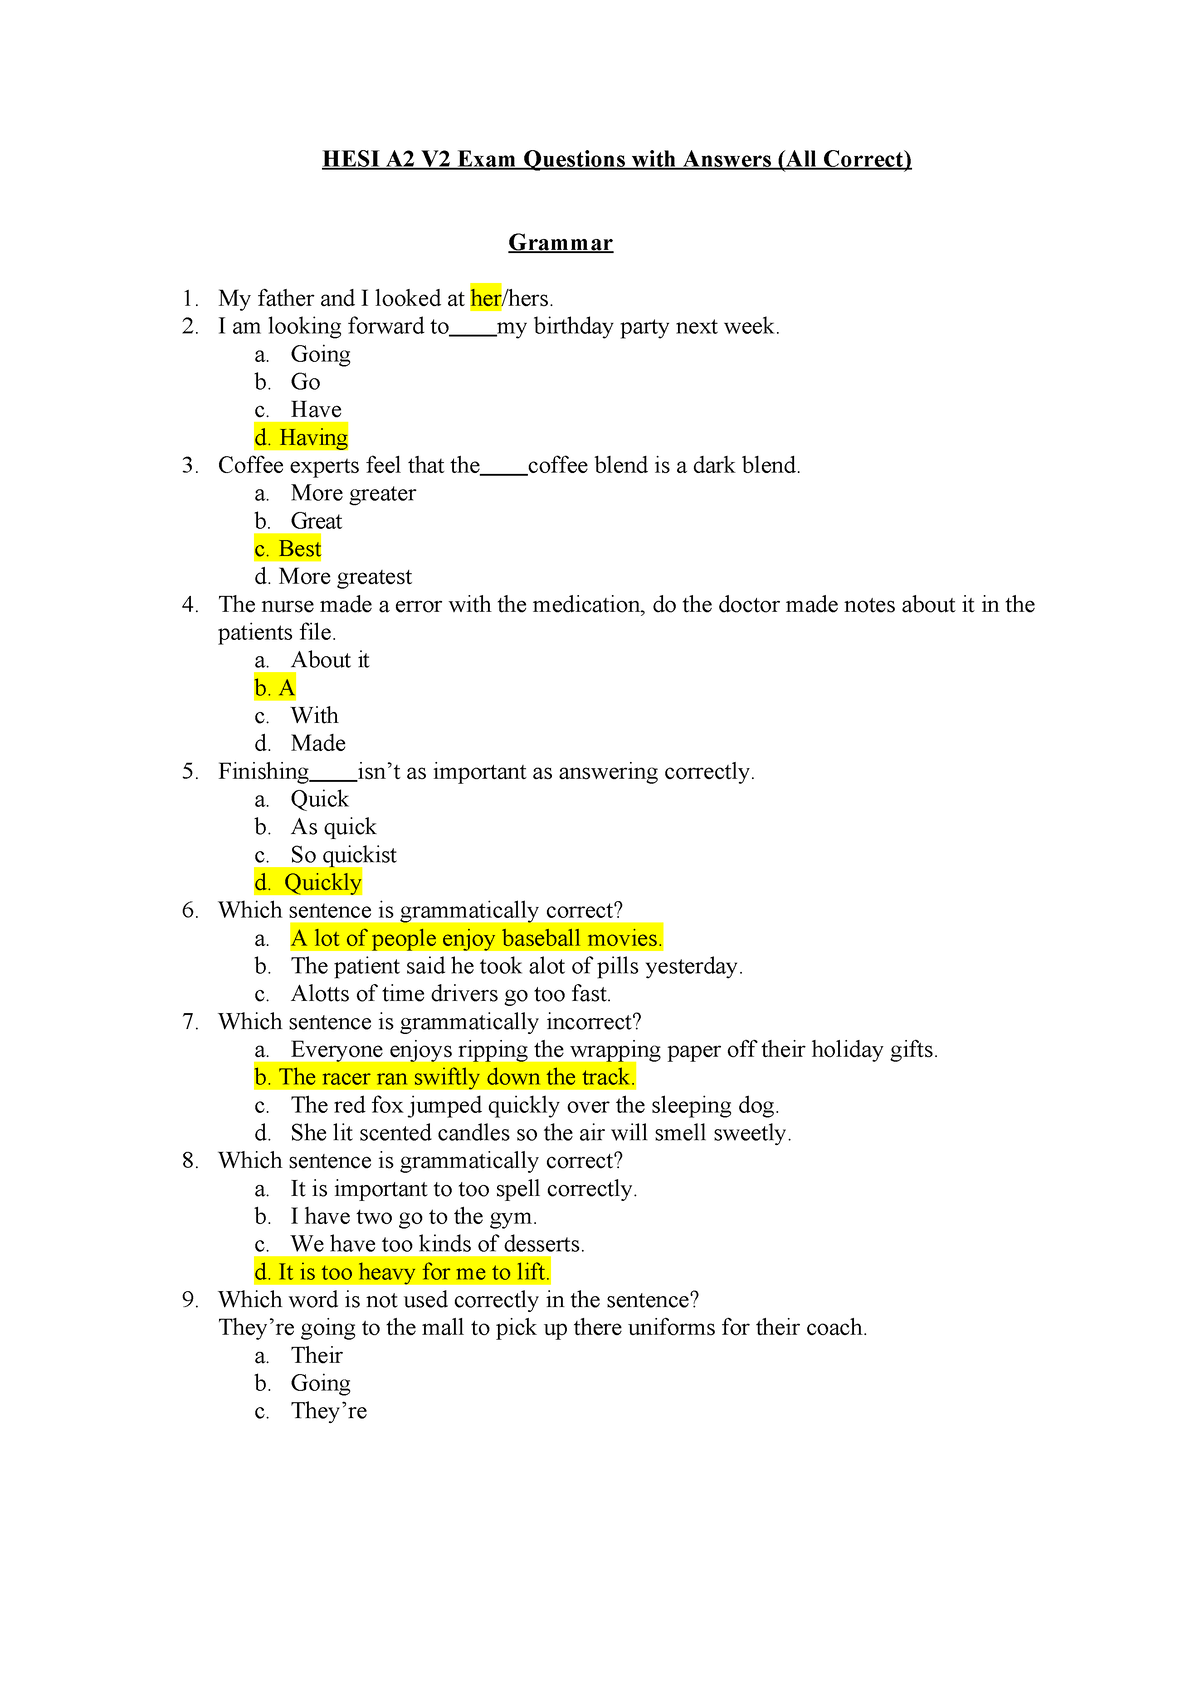 hesi-a2-v2-exam-questions-and-answers-all-correct-hesi-a2-v2-exam